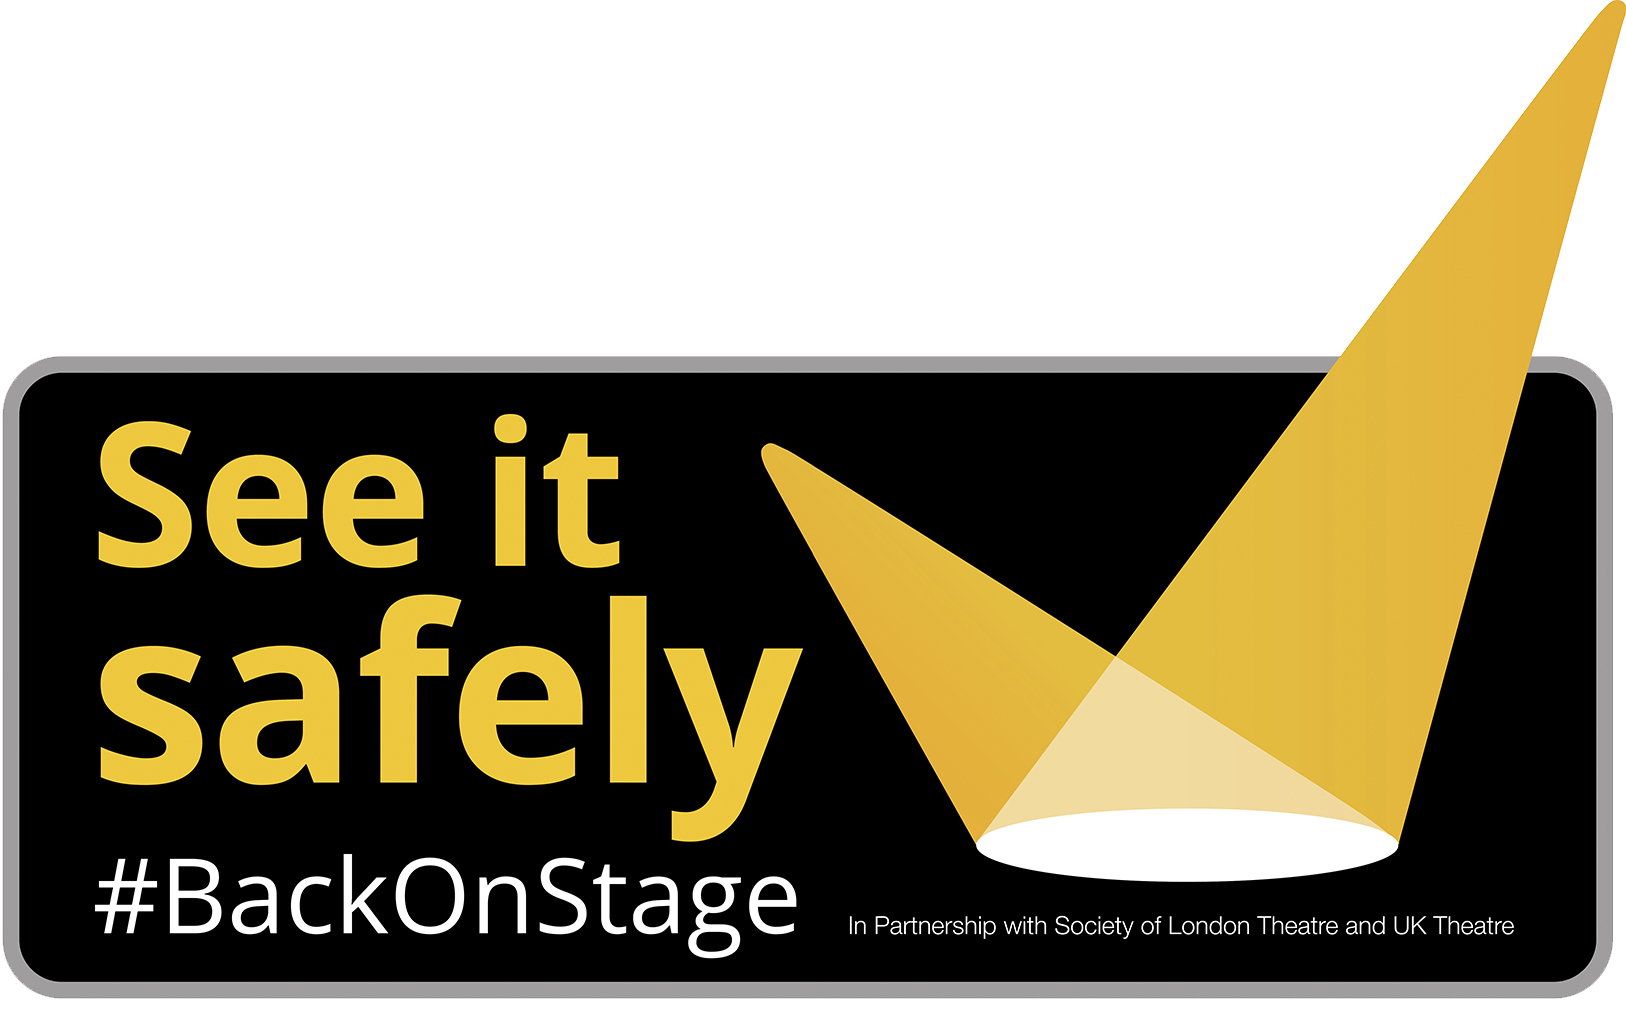 See it safely #BackOnStage